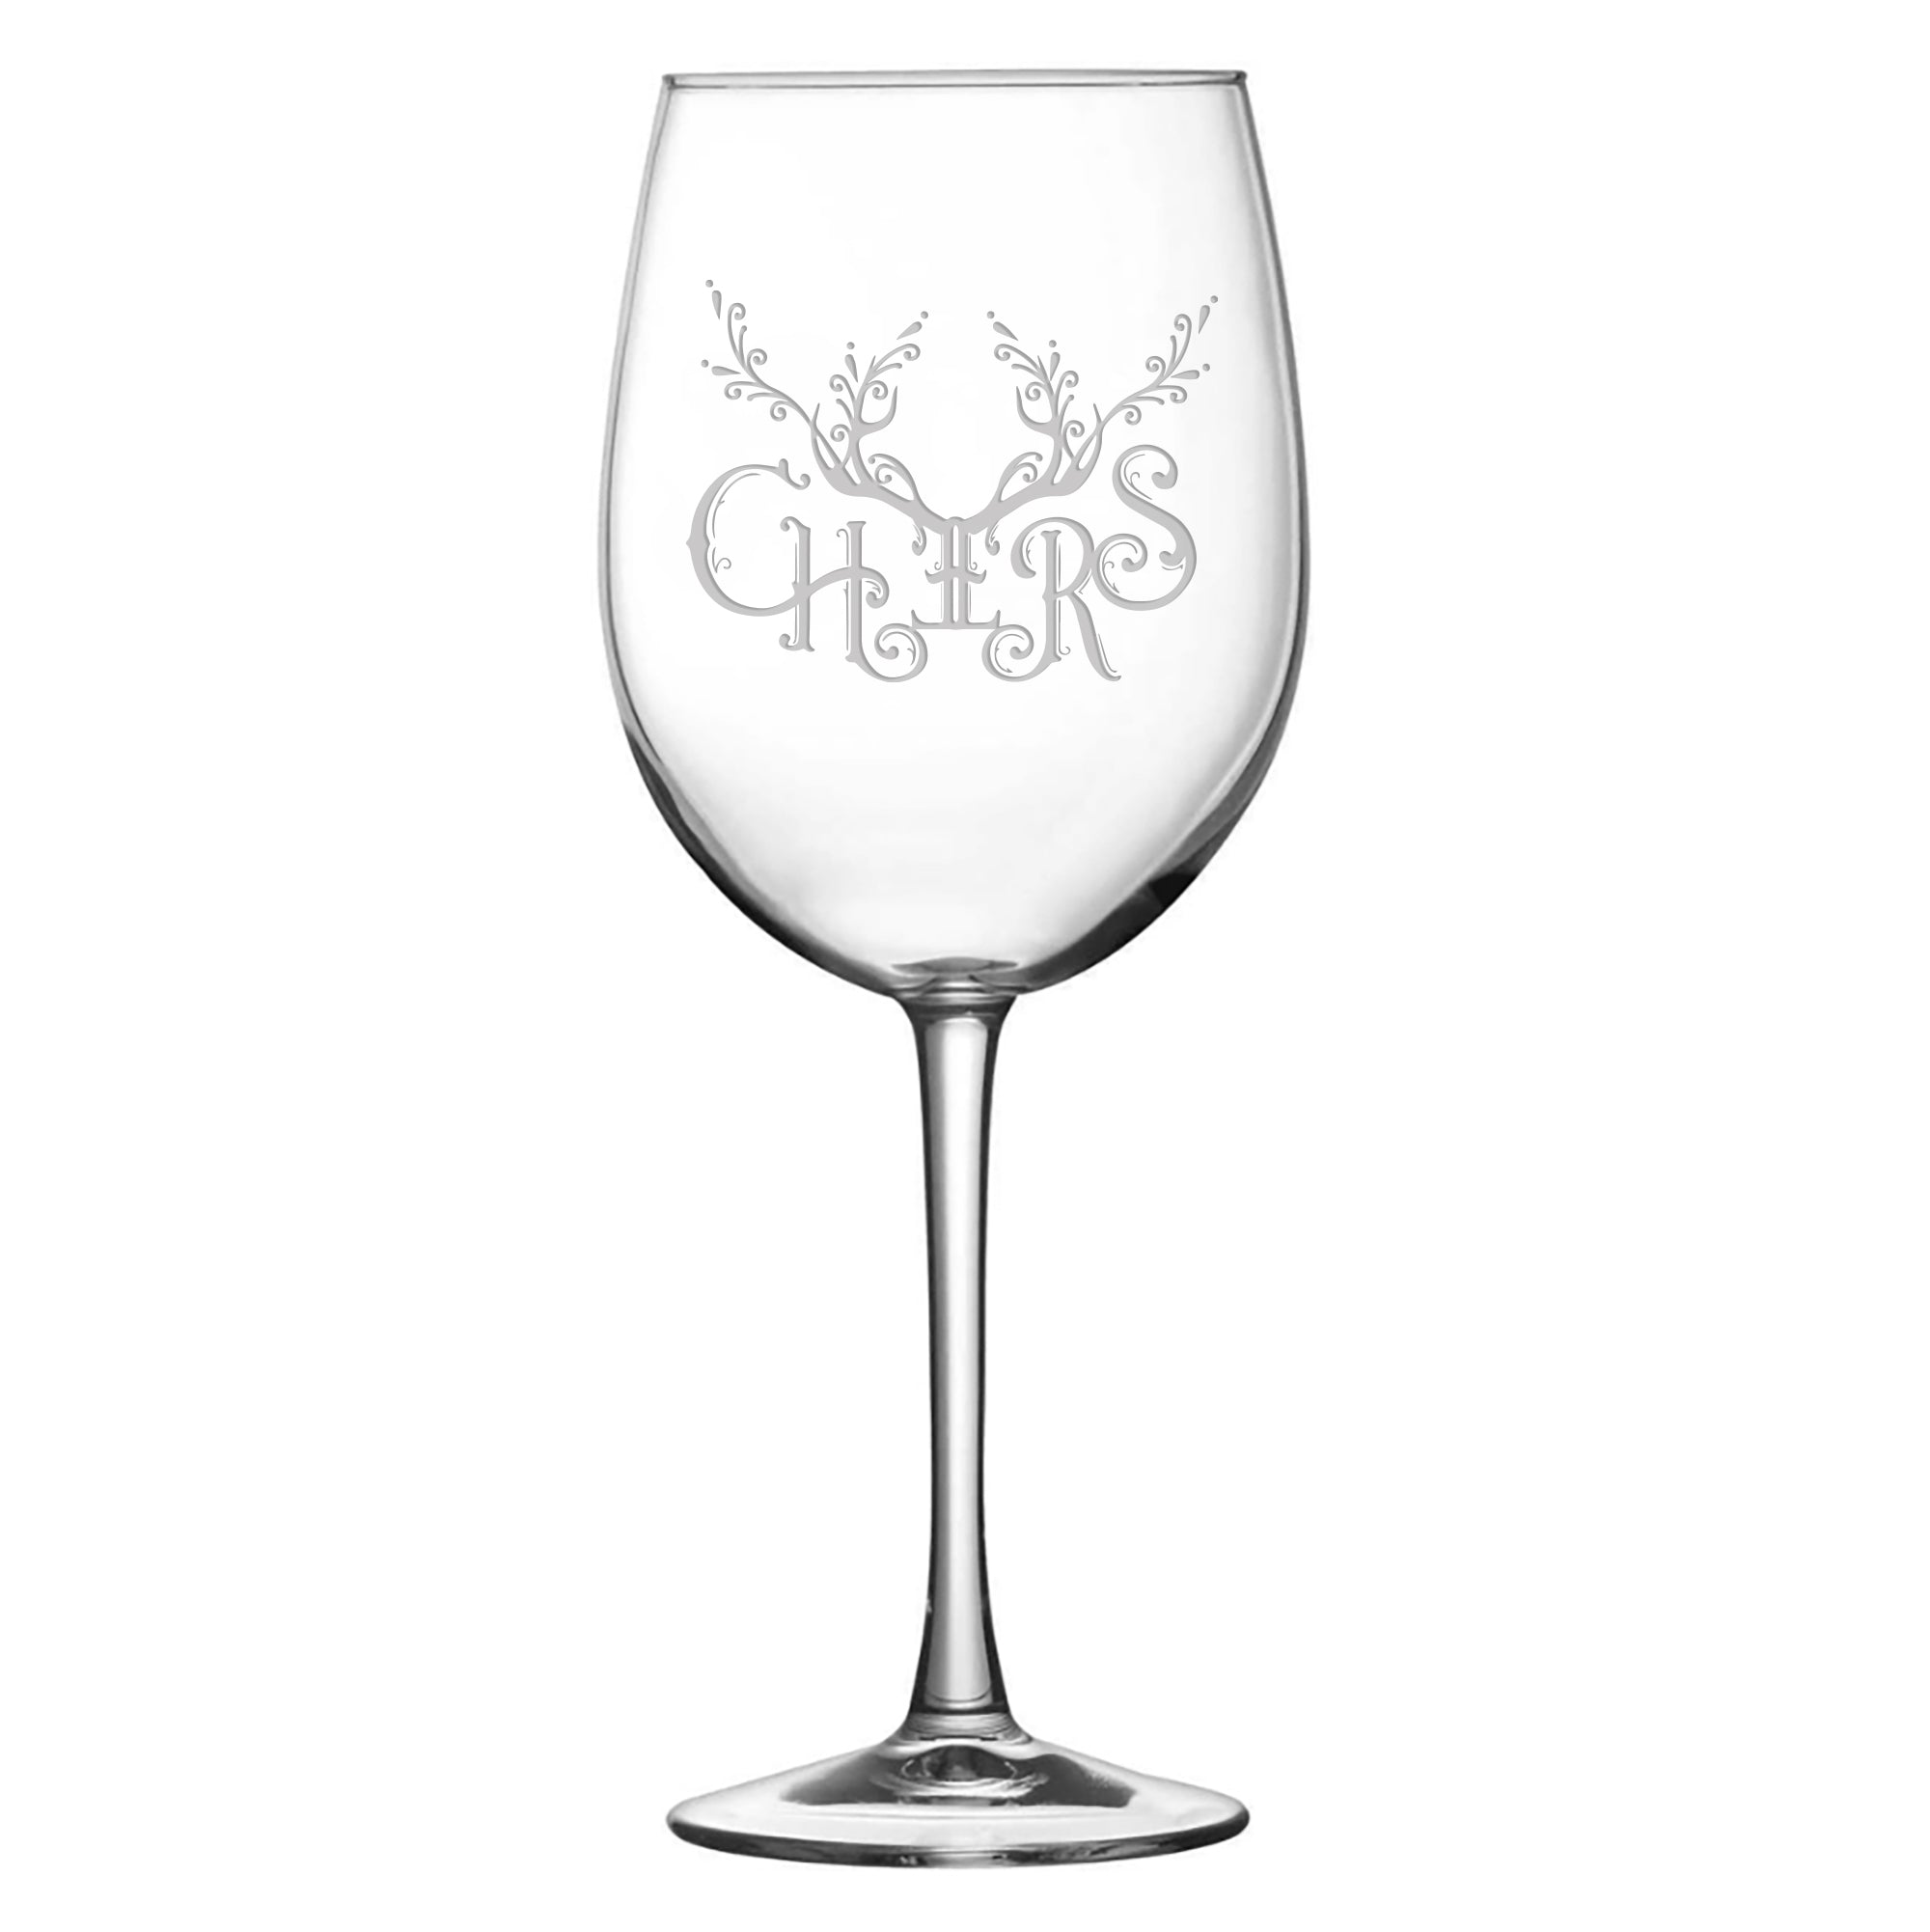 Premium Christmas Cheers, Stemmed Tulip Wine Glass, 16oz, Laser Etched or Hand Etched